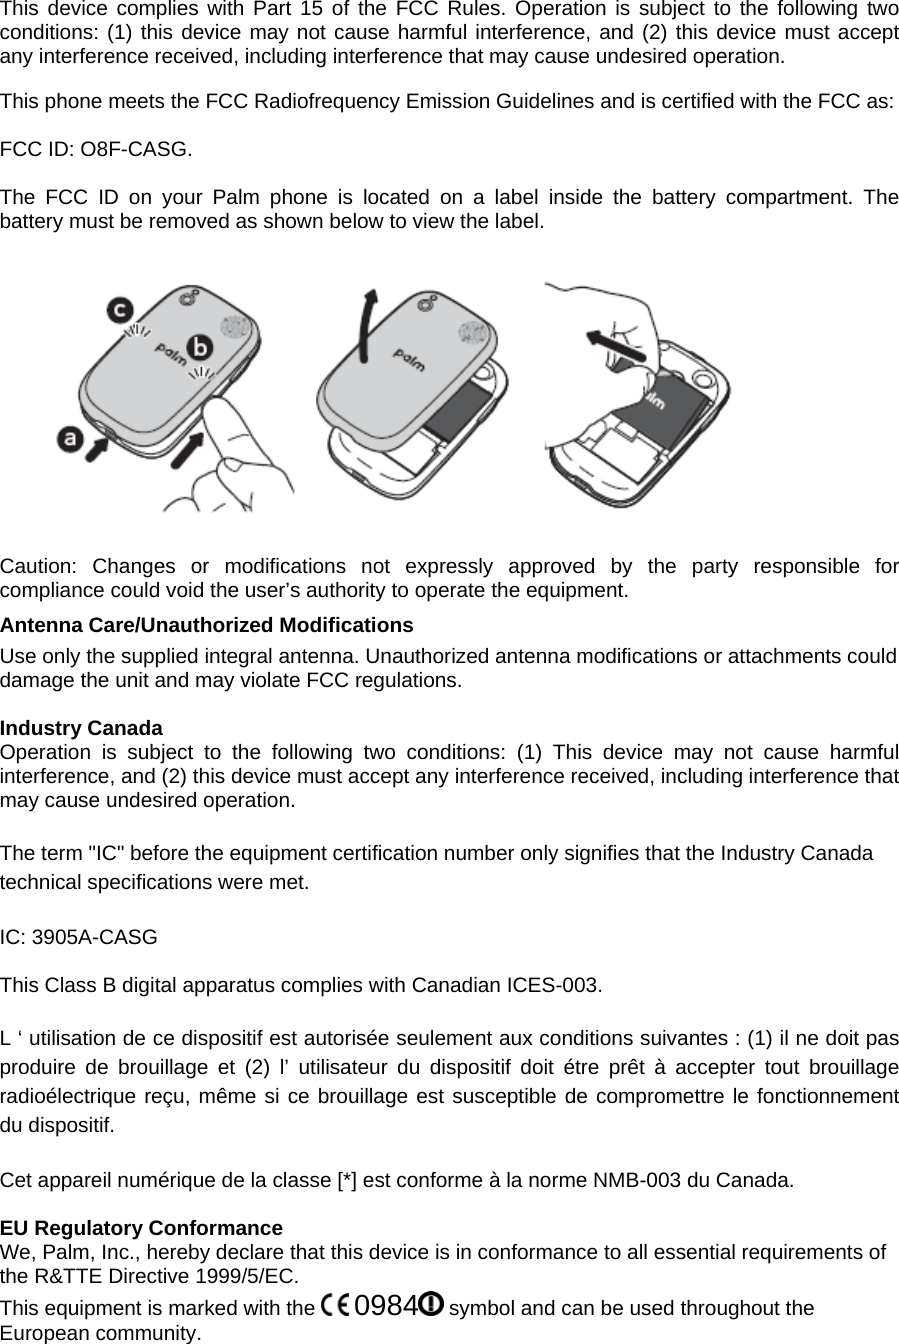 This device complies with Part 15 of the FCC Rules. Operation is subject to the following two conditions: (1) this device may not cause harmful interference, and (2) this device must accept any interference received, including interference that may cause undesired operation.  This phone meets the FCC Radiofrequency Emission Guidelines and is certified with the FCC as:  FCC ID: O8F-CASG.  The FCC ID on your Palm phone is located on a label inside the battery compartment. The battery must be removed as shown below to view the label.      Caution: Changes or modifications not expressly approved by the party responsible for compliance could void the user’s authority to operate the equipment. Antenna Care/Unauthorized Modifications  Use only the supplied integral antenna. Unauthorized antenna modifications or attachments could damage the unit and may violate FCC regulations.  Industry Canada Operation is subject to the following two conditions: (1) This device may not cause harmful interference, and (2) this device must accept any interference received, including interference that may cause undesired operation.  The term &quot;IC&quot; before the equipment certification number only signifies that the Industry Canada technical specifications were met.  IC: 3905A-CASG  This Class B digital apparatus complies with Canadian ICES-003.  L ‘ utilisation de ce dispositif est autorisée seulement aux conditions suivantes : (1) il ne doit pas produire de brouillage et (2) l’ utilisateur du dispositif doit étre prêt à accepter tout brouillage radioélectrique reçu, même si ce brouillage est susceptible de compromettre le fonctionnement du dispositif.  Cet appareil numérique de la classe [*] est conforme à la norme NMB-003 du Canada.  EU Regulatory Conformance We, Palm, Inc., hereby declare that this device is in conformance to all essential requirements of the R&amp;TTE Directive 1999/5/EC. This equipment is marked with the   0984  symbol and can be used throughout the European community. 